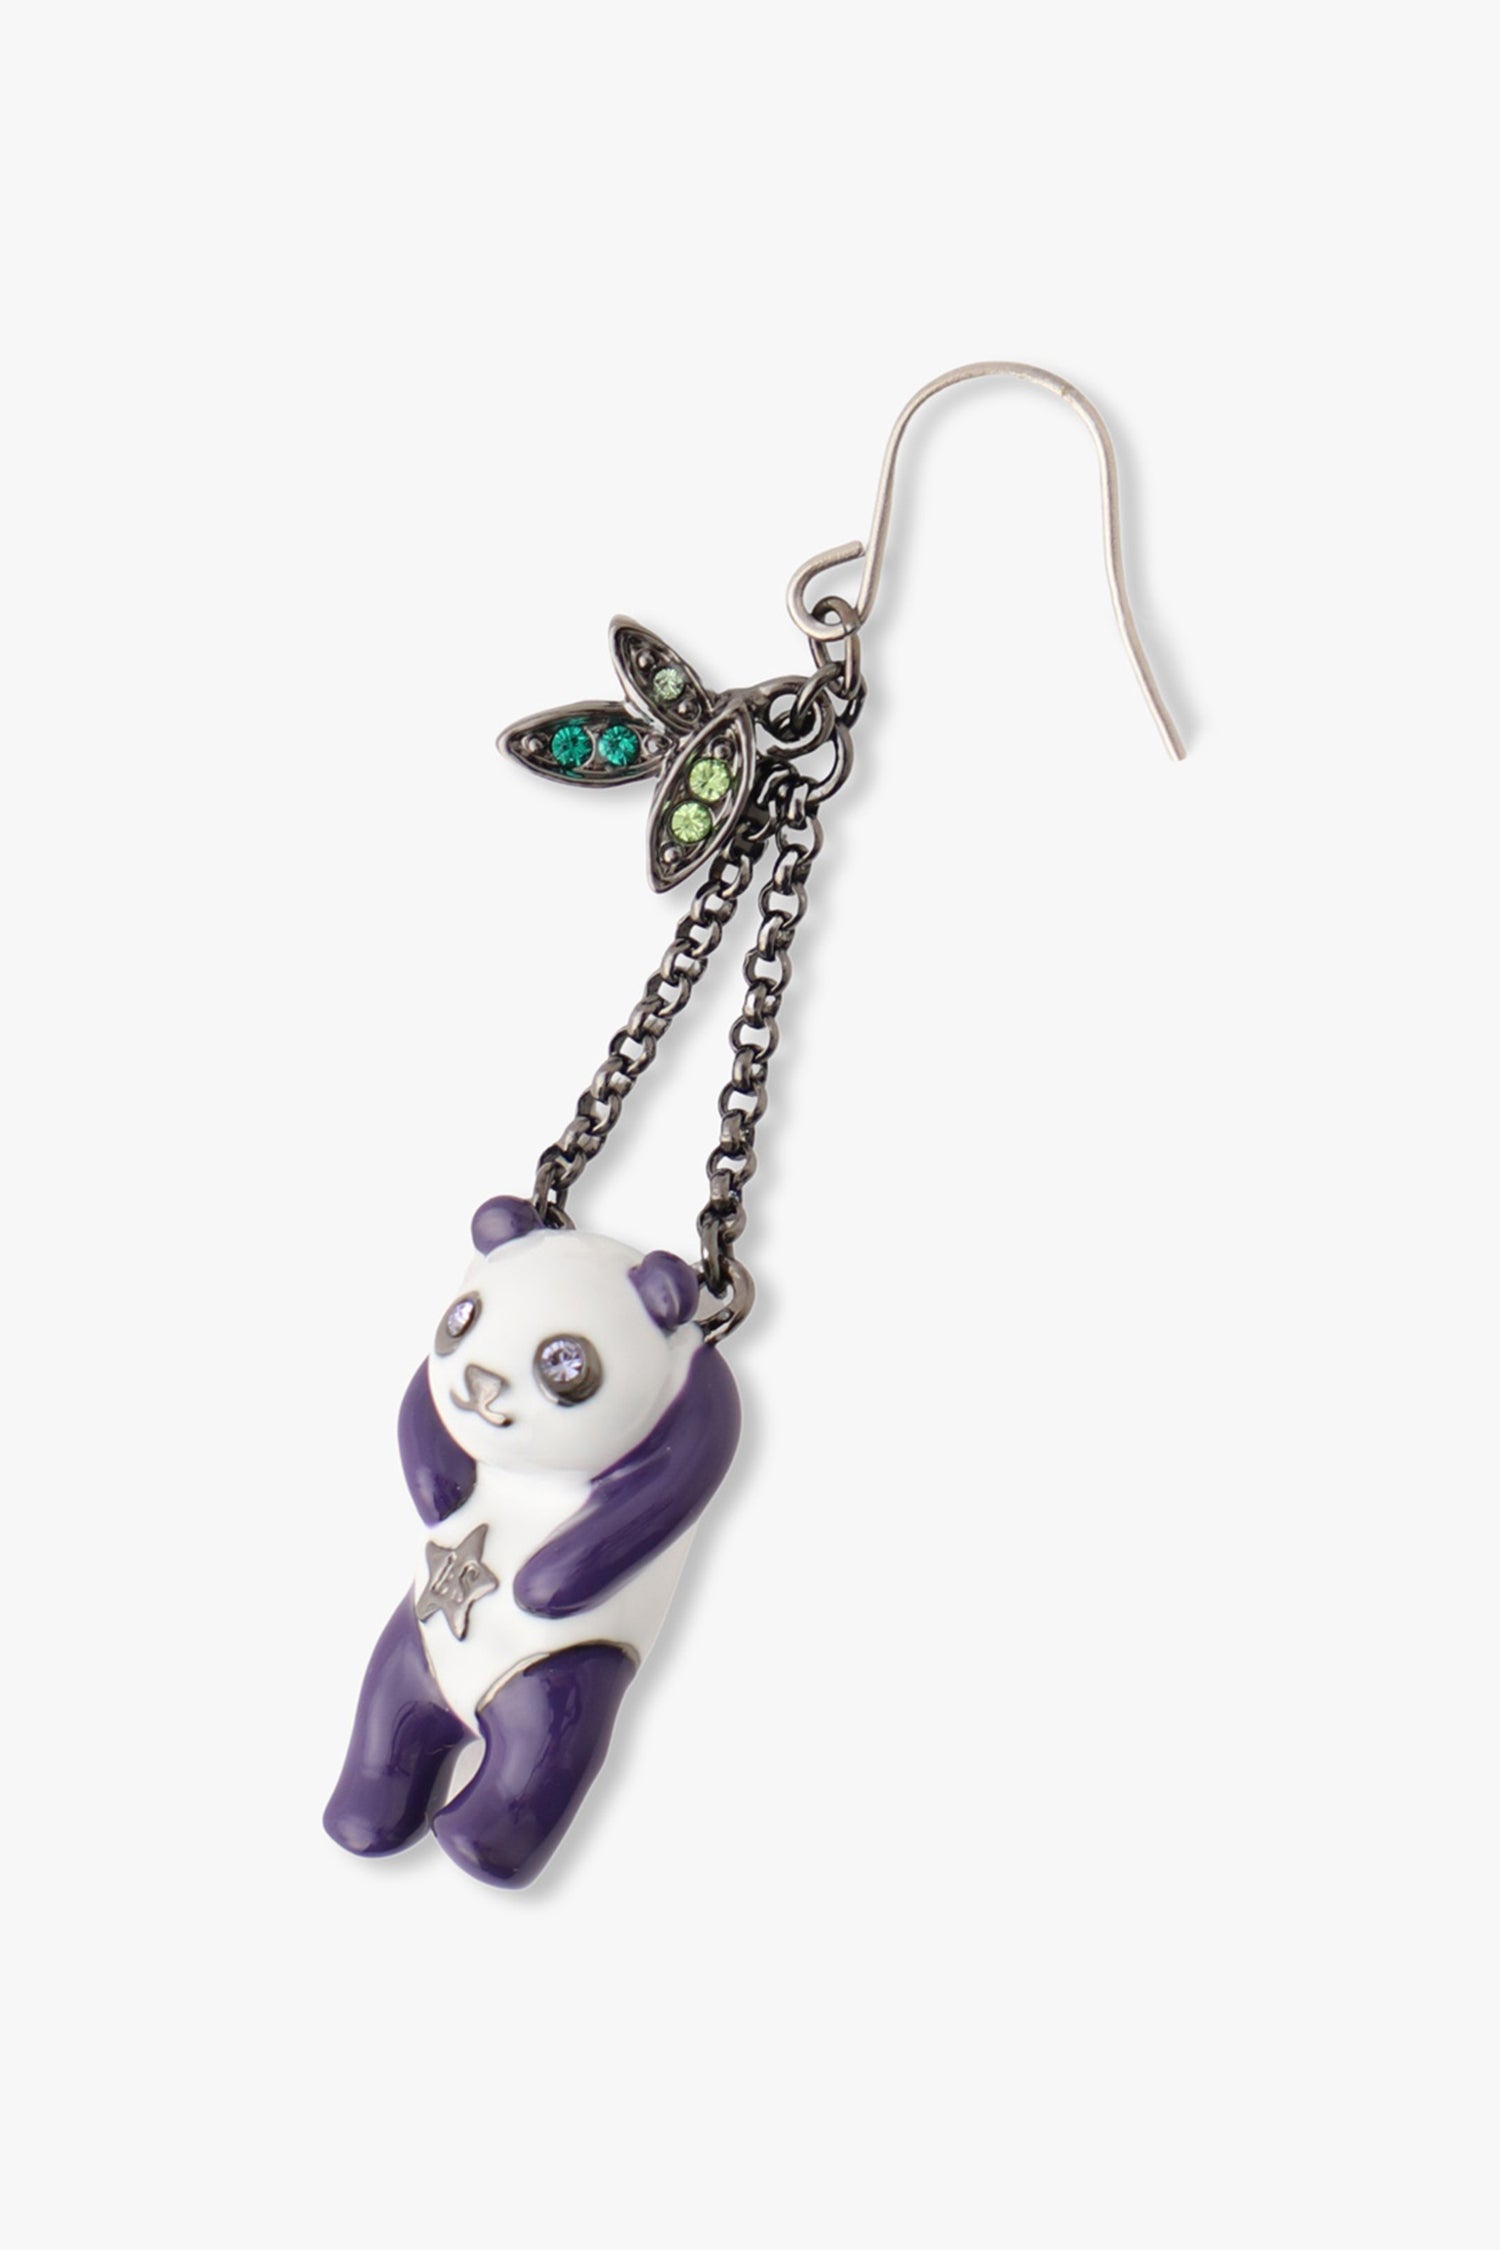 Panda is white head and body, purple arms legs and ears, gunmetal chain, 3-oval badges,  Earwire